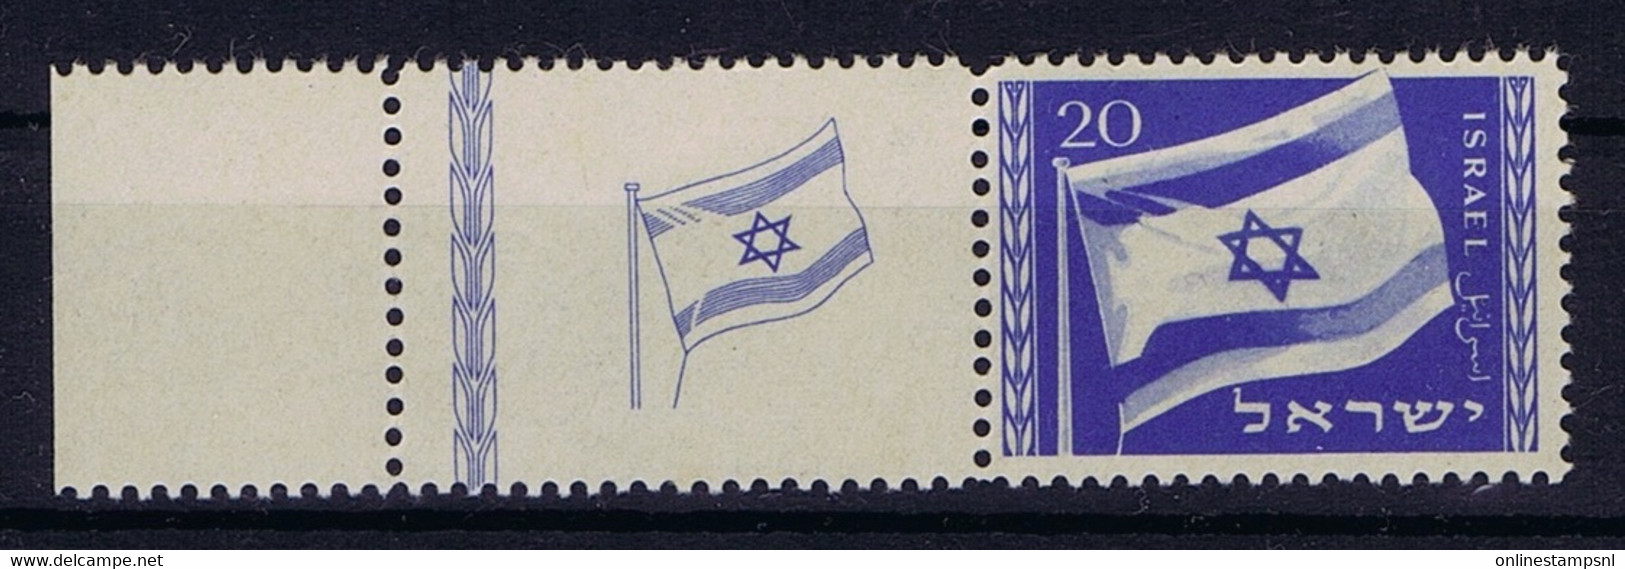 Israel: Mi  16 With Tab MNH/** Sans Charniere. Postfrisch 1949  Some Spots - Neufs (avec Tabs)